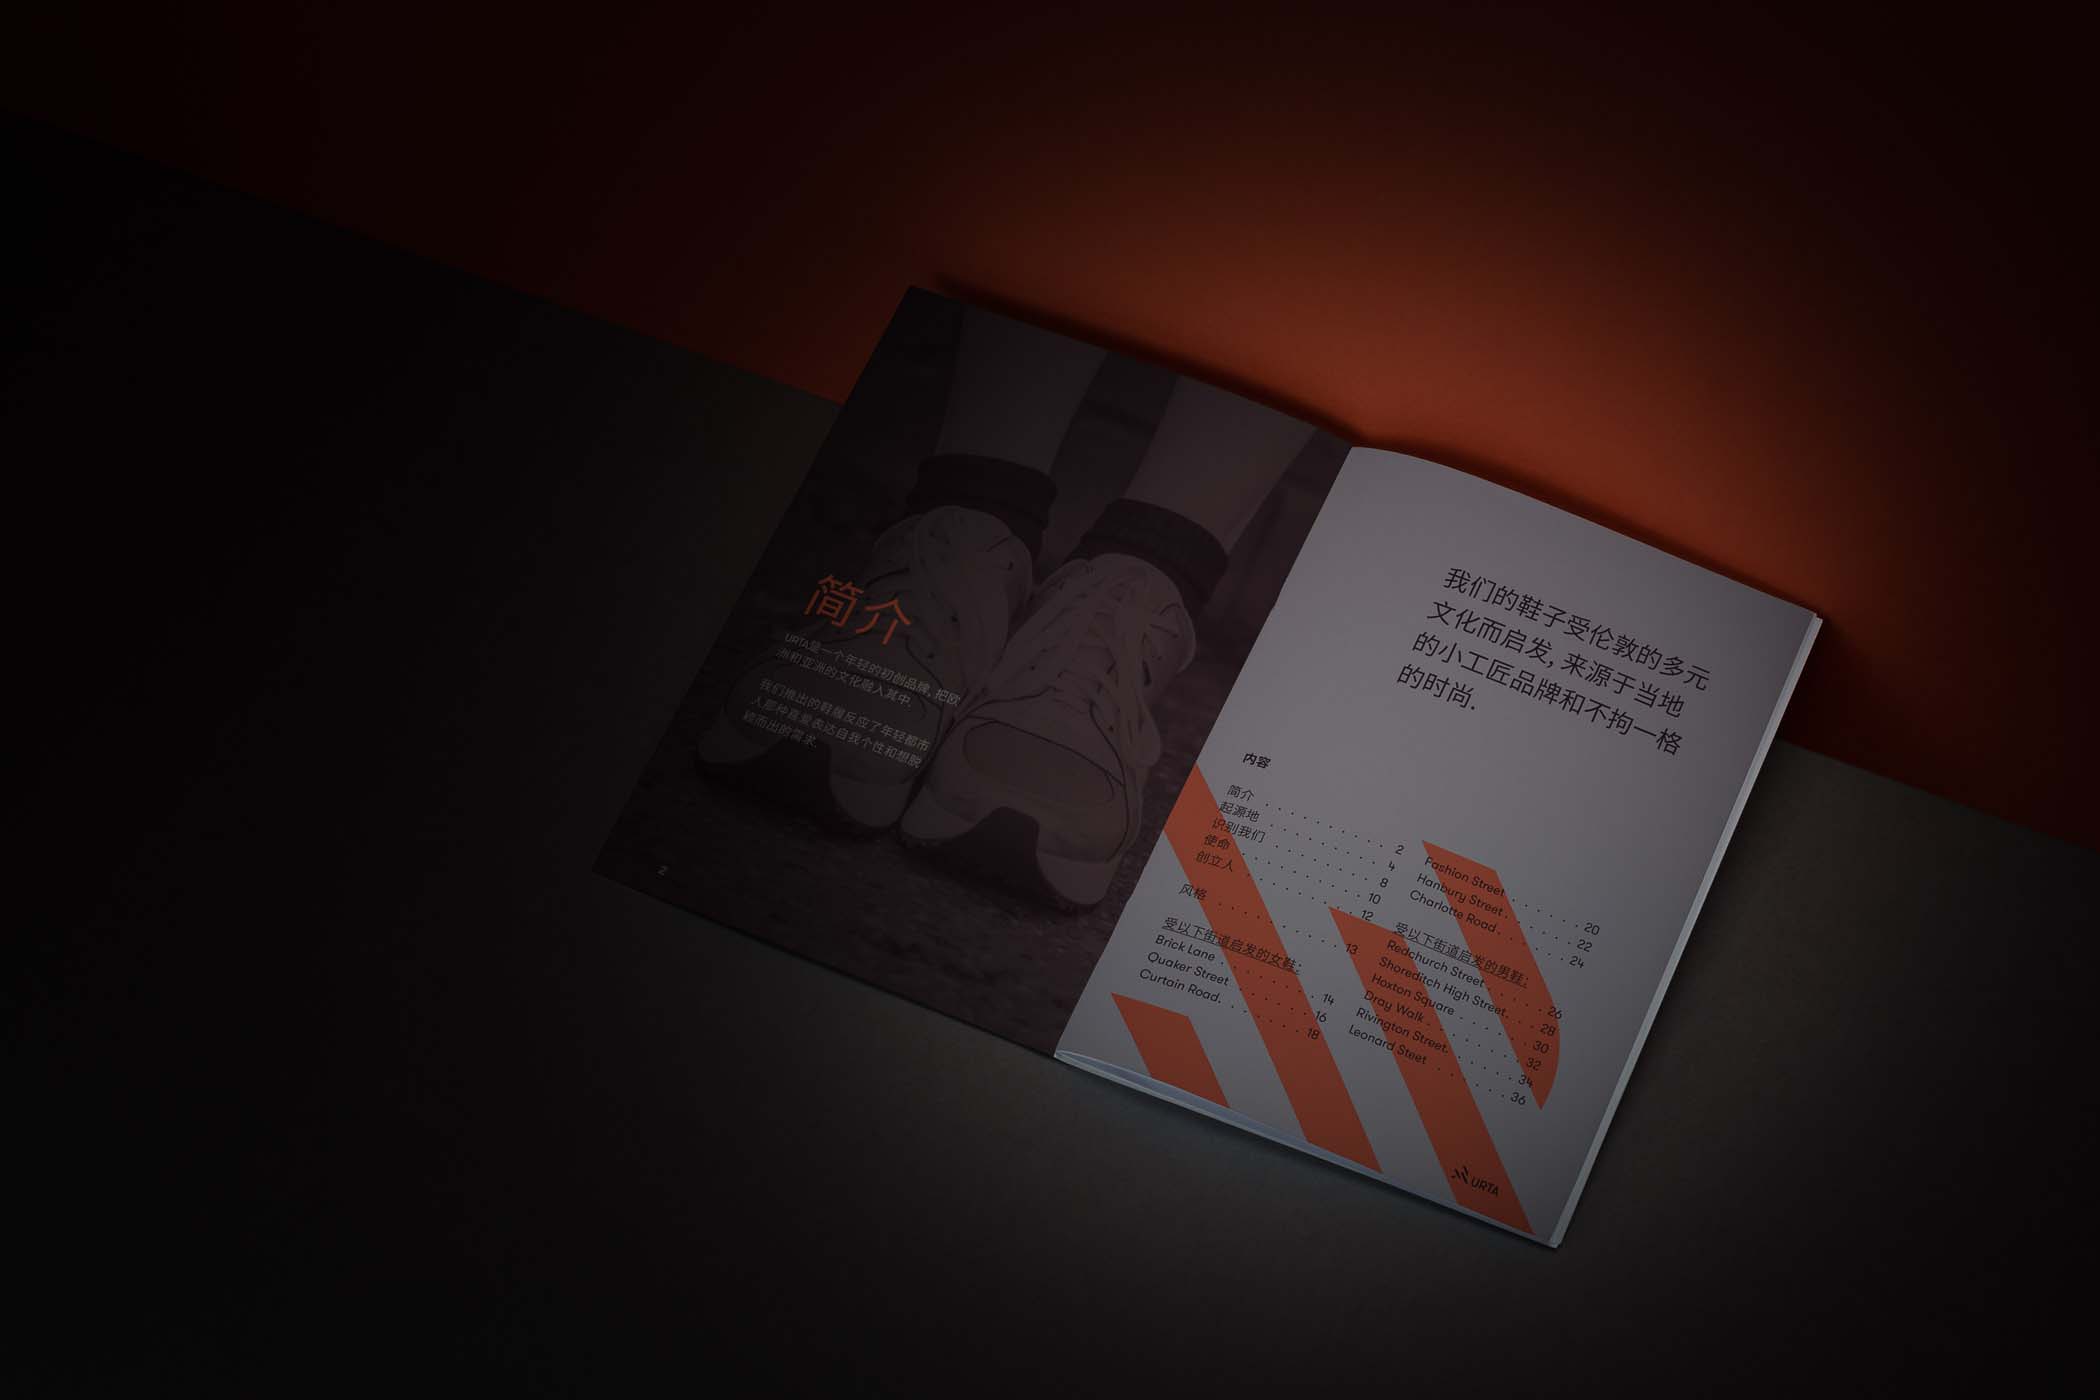 Booklet for URTA footwear, opened at a page introducing the brand in Chinese.